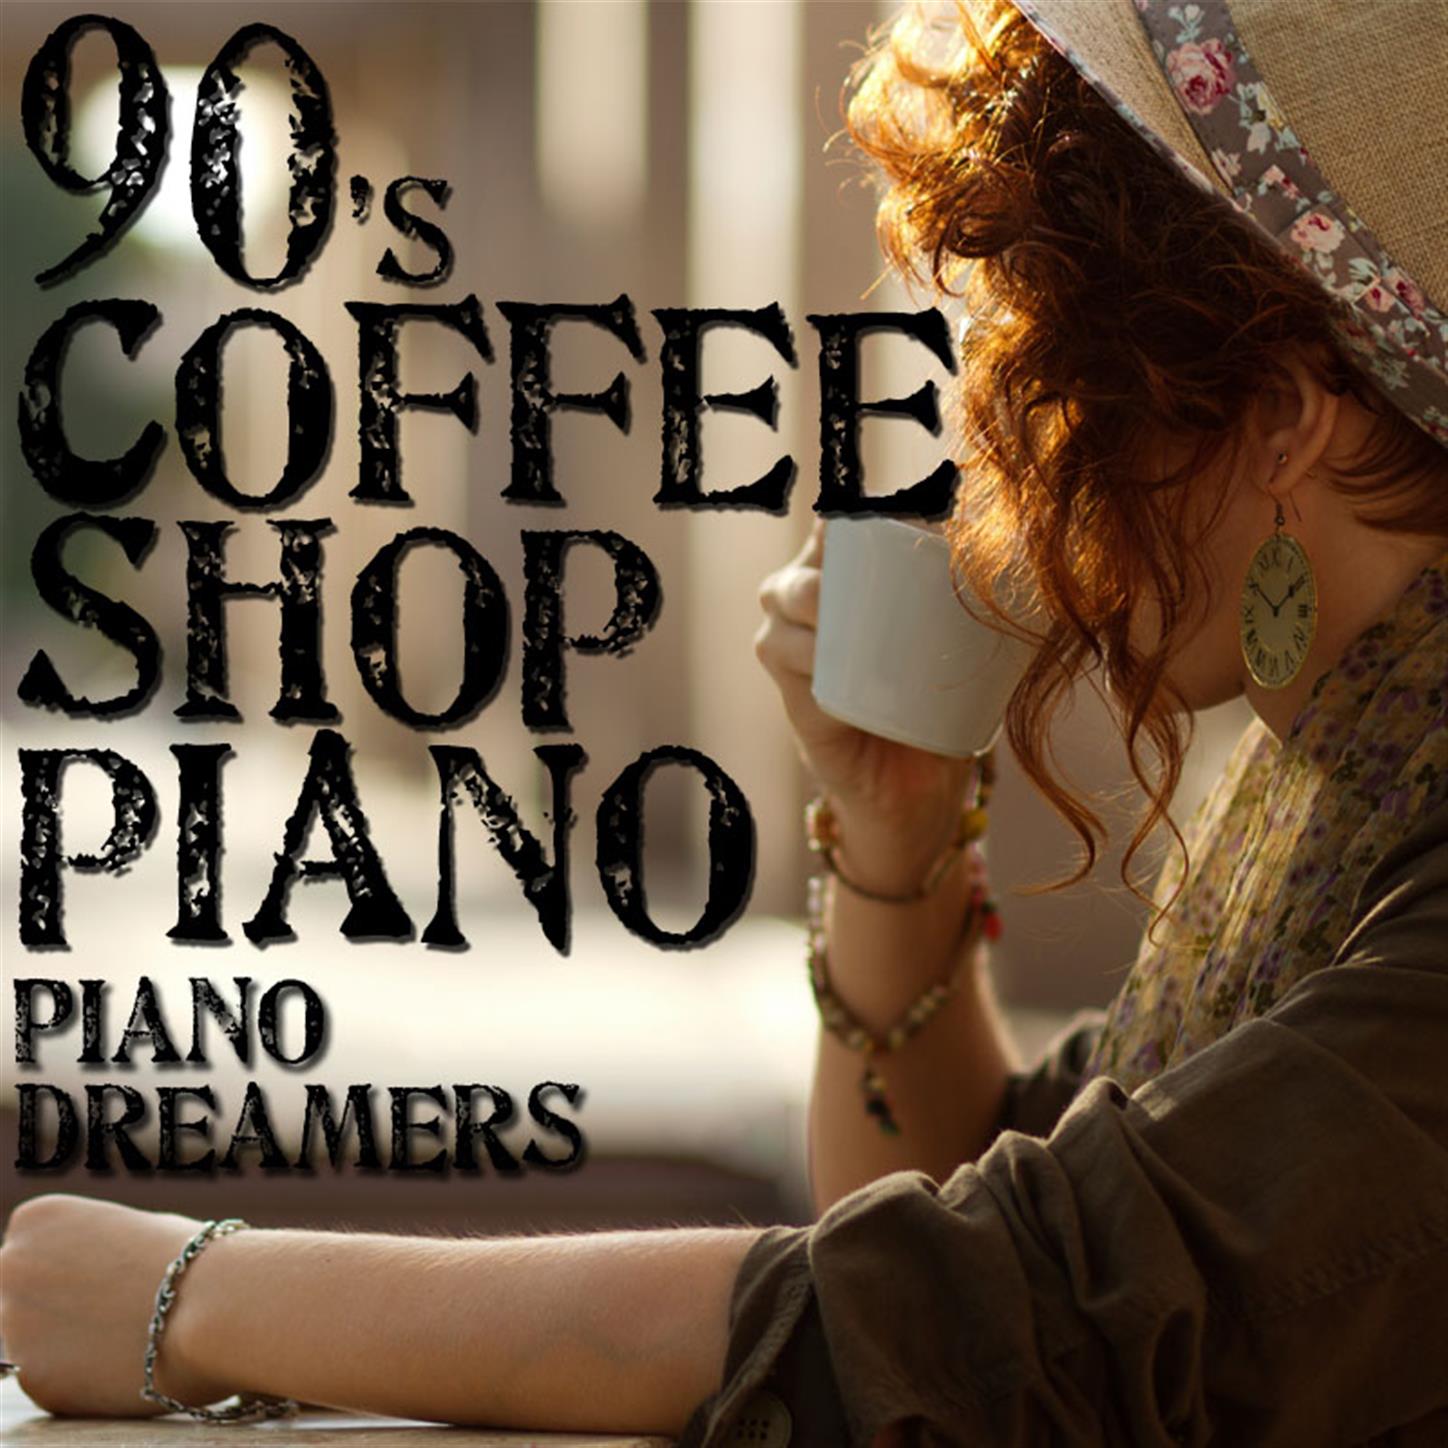 Piano Dreamers Perform the Hits of The Beatles